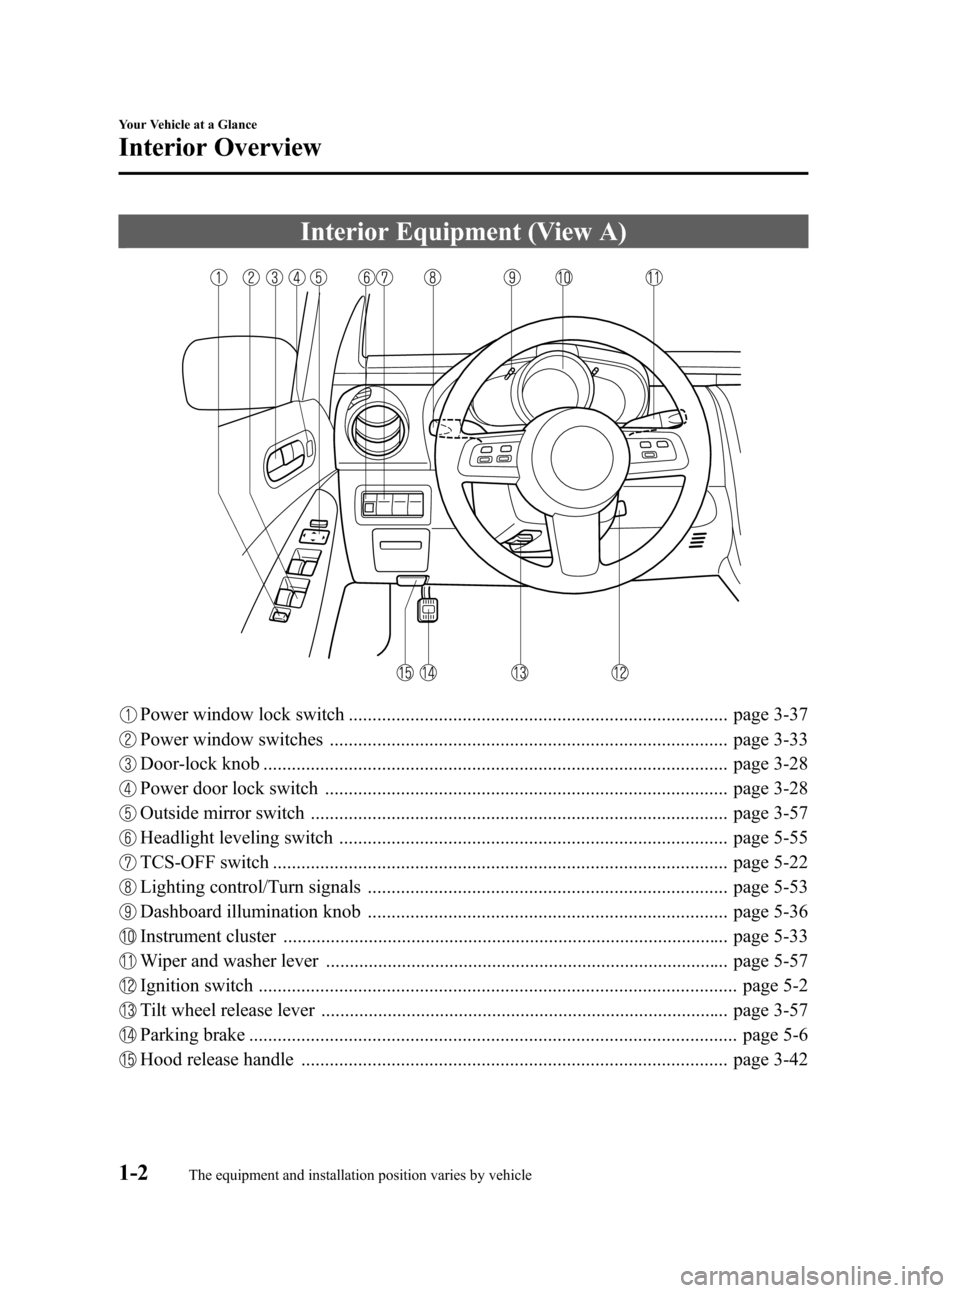 MAZDA MODEL CX-7 2009  Owners Manual (in English) Black plate (8,1)
Interior Equipment (View A)
Power window lock switch ................................................................................ page 3-37
Power window switches ................